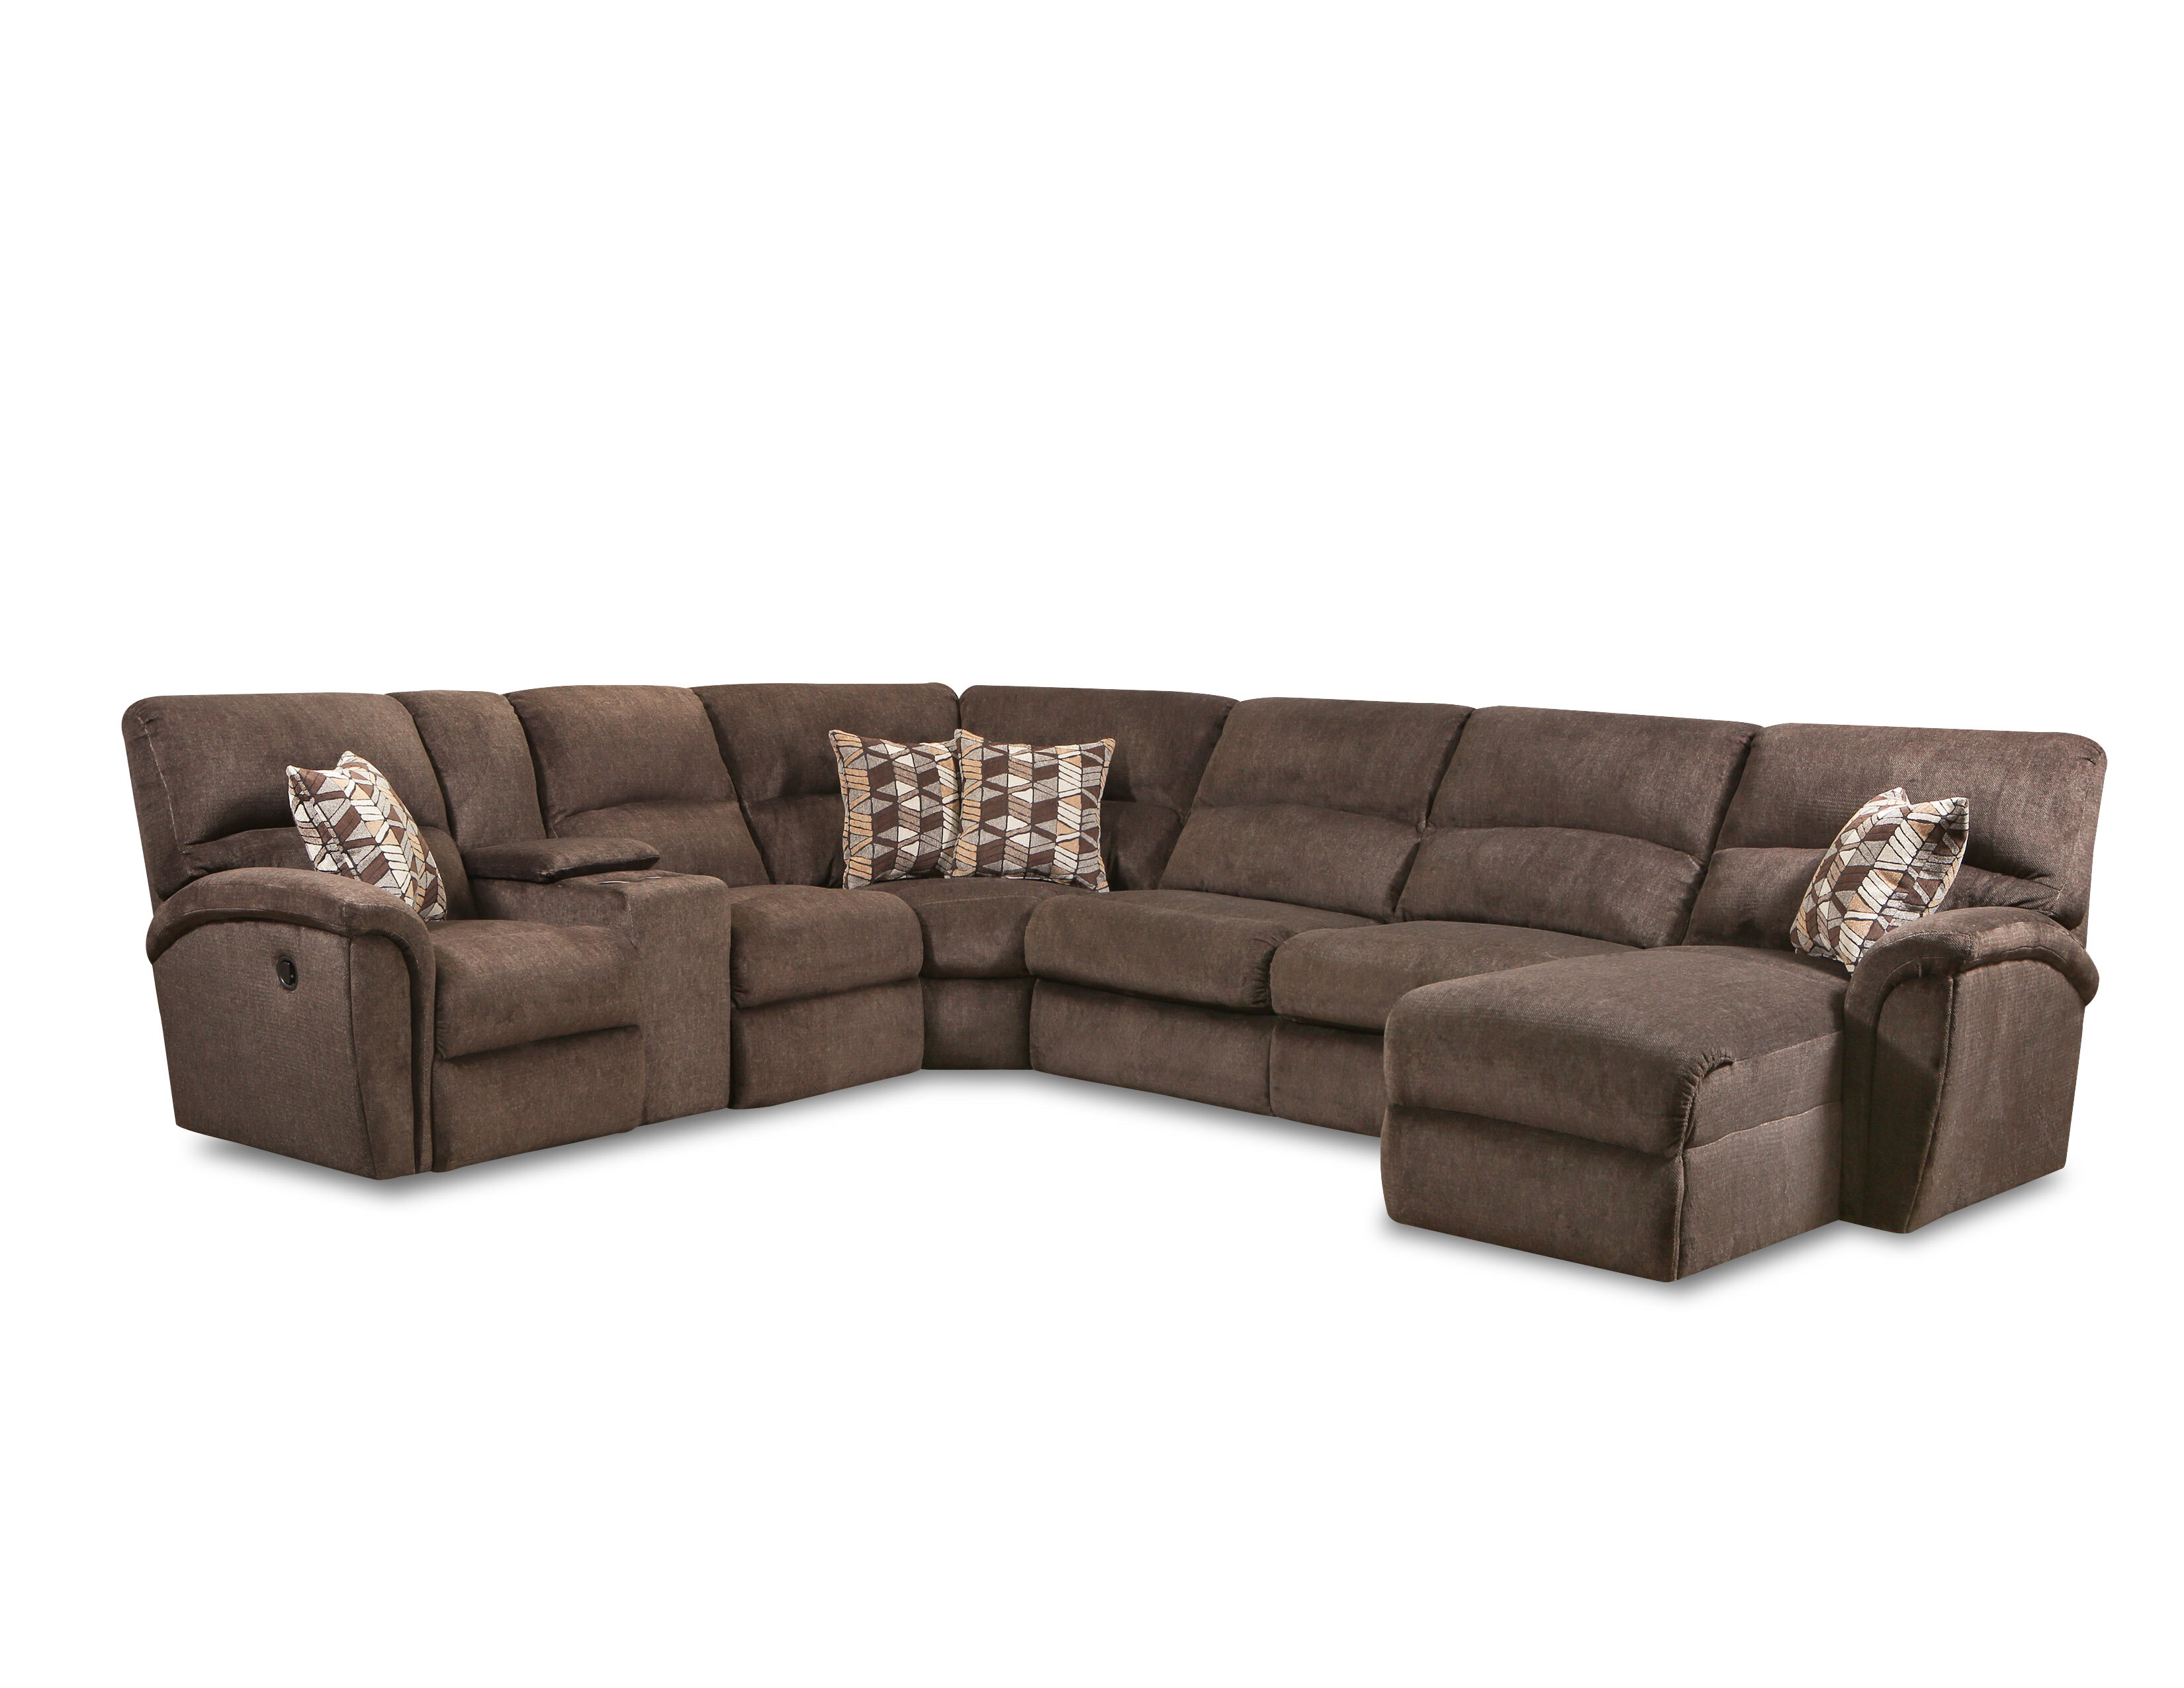 Red Barrel Studio Ivy Hill Sectional Collection Wayfair